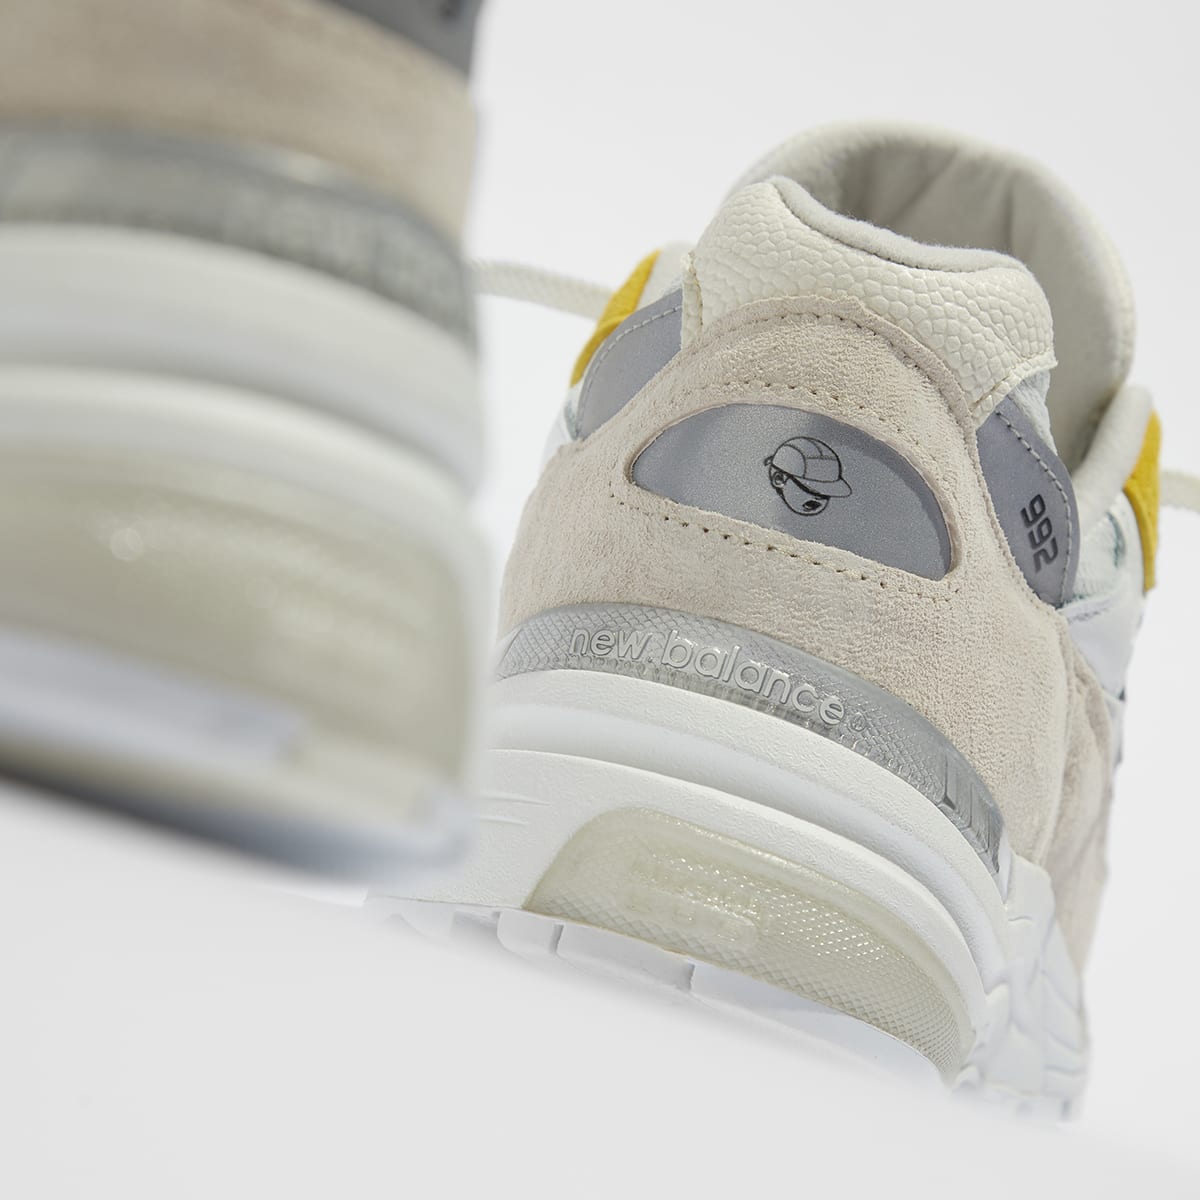 New Balance x Paperboy 992 (Fried Egg) | END. Launches